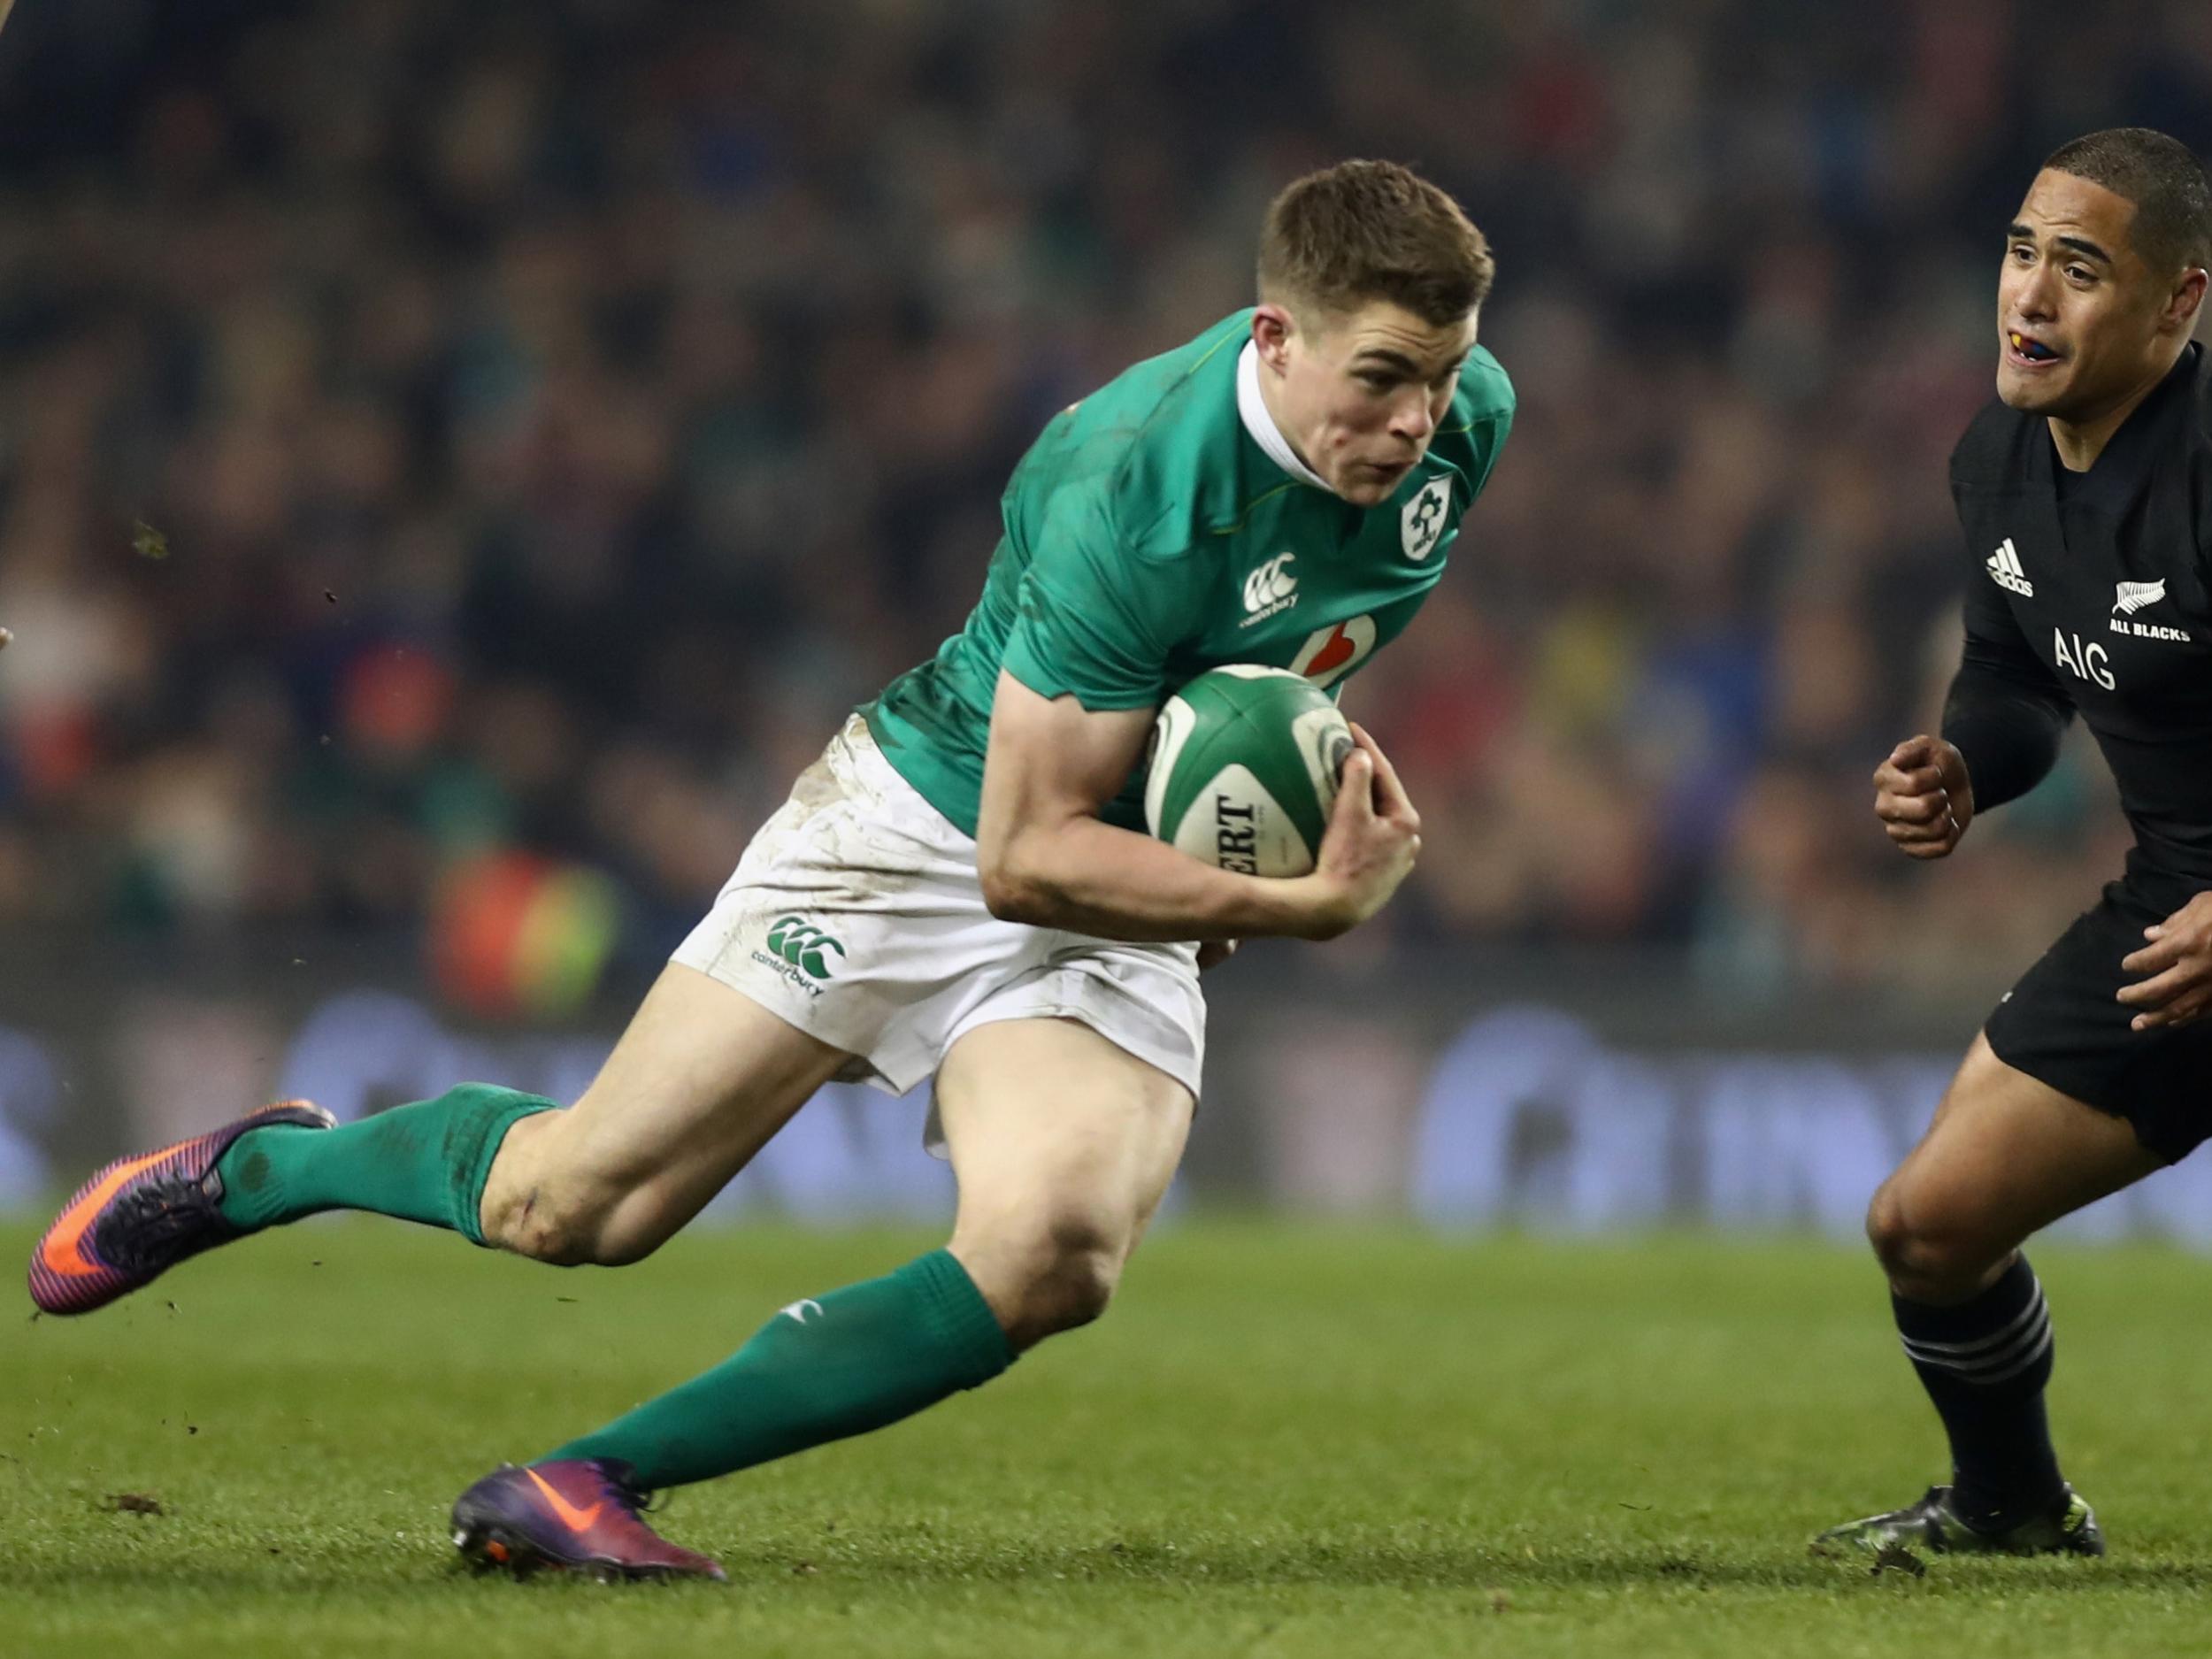 Ringrose came off the bench against the All Blacks last week